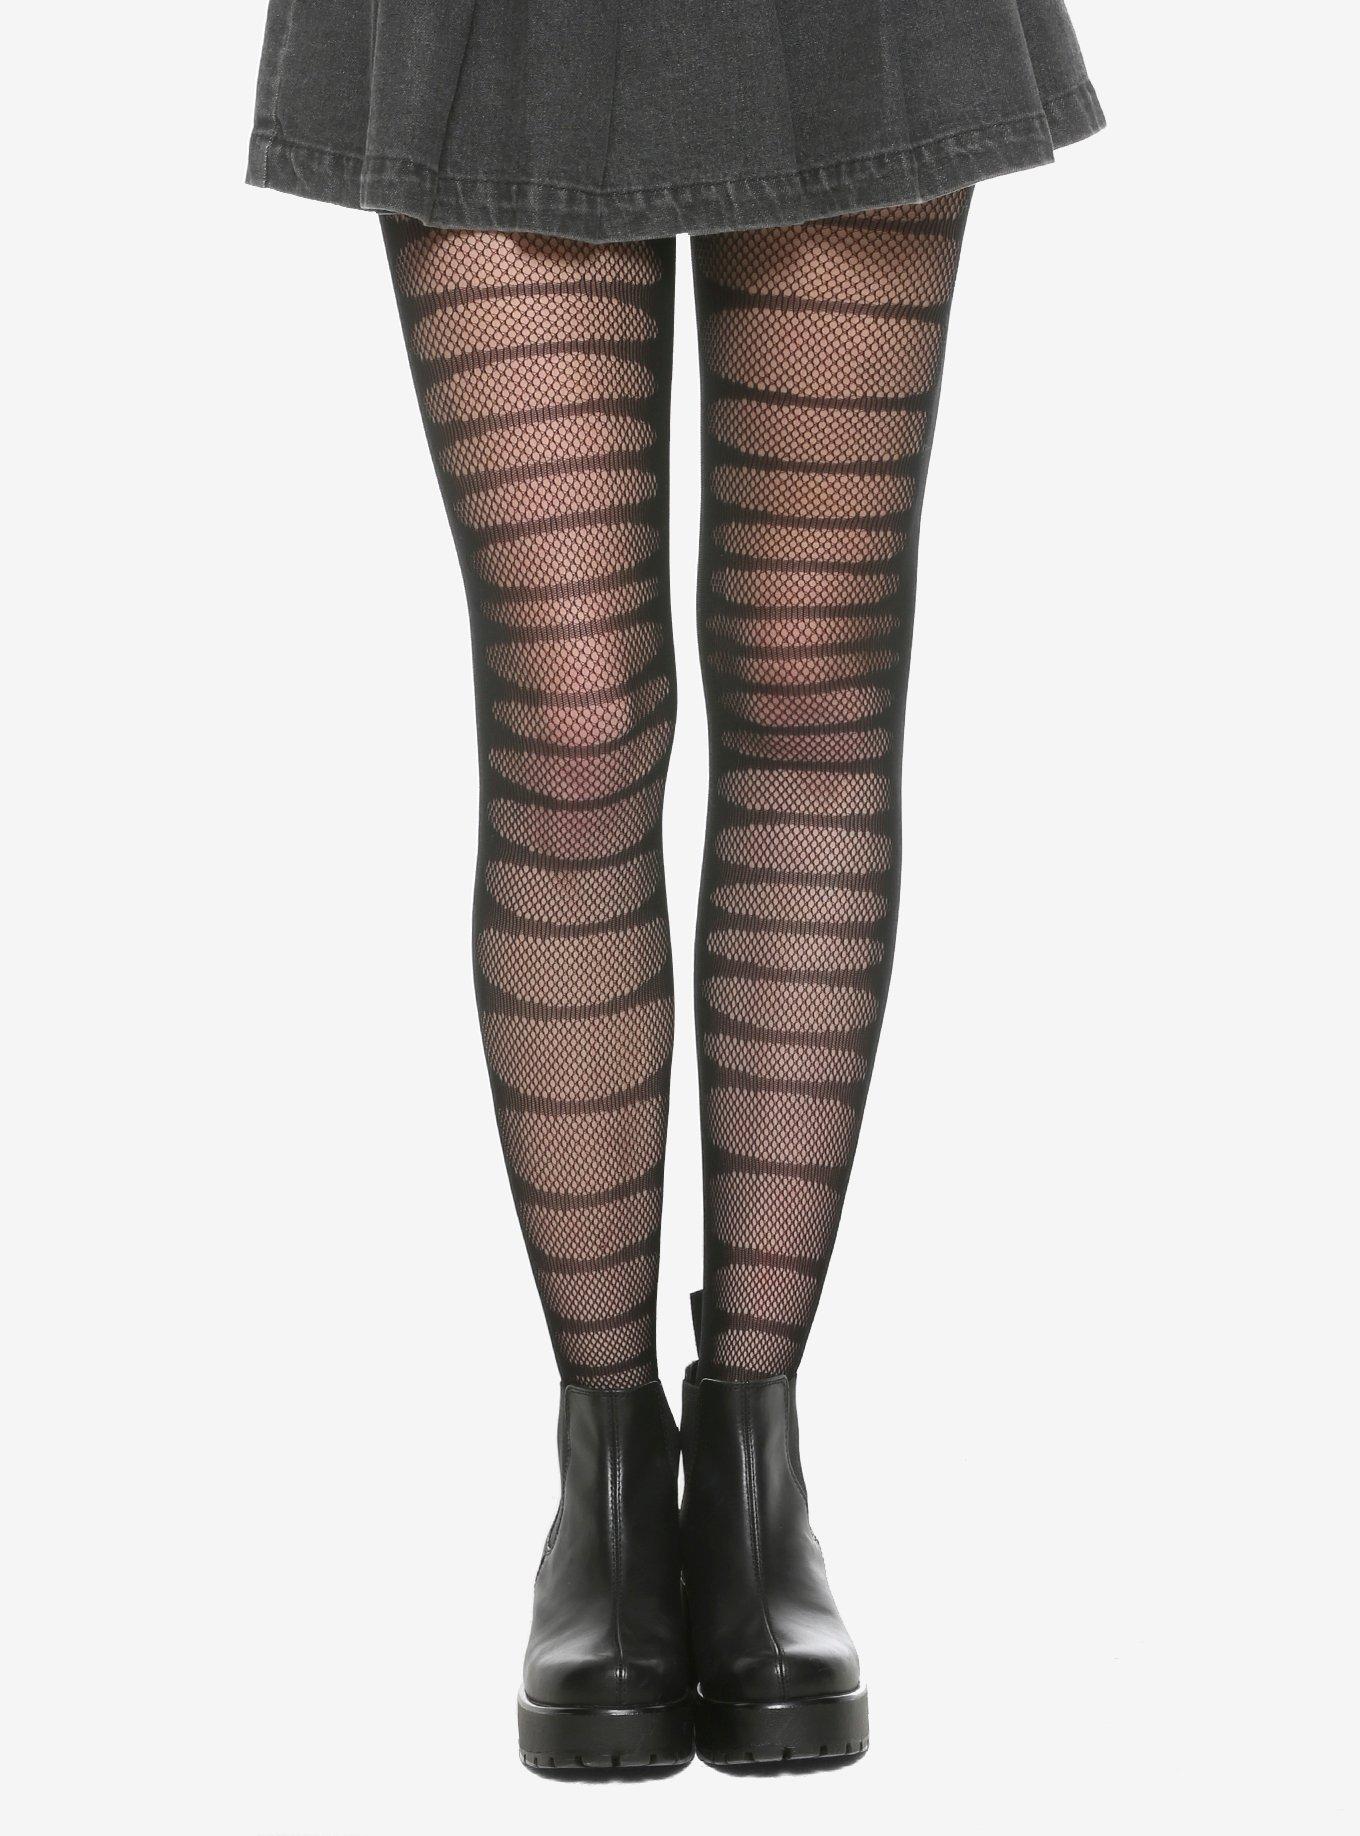 Distressed Fishnet Tights | Hot Topic